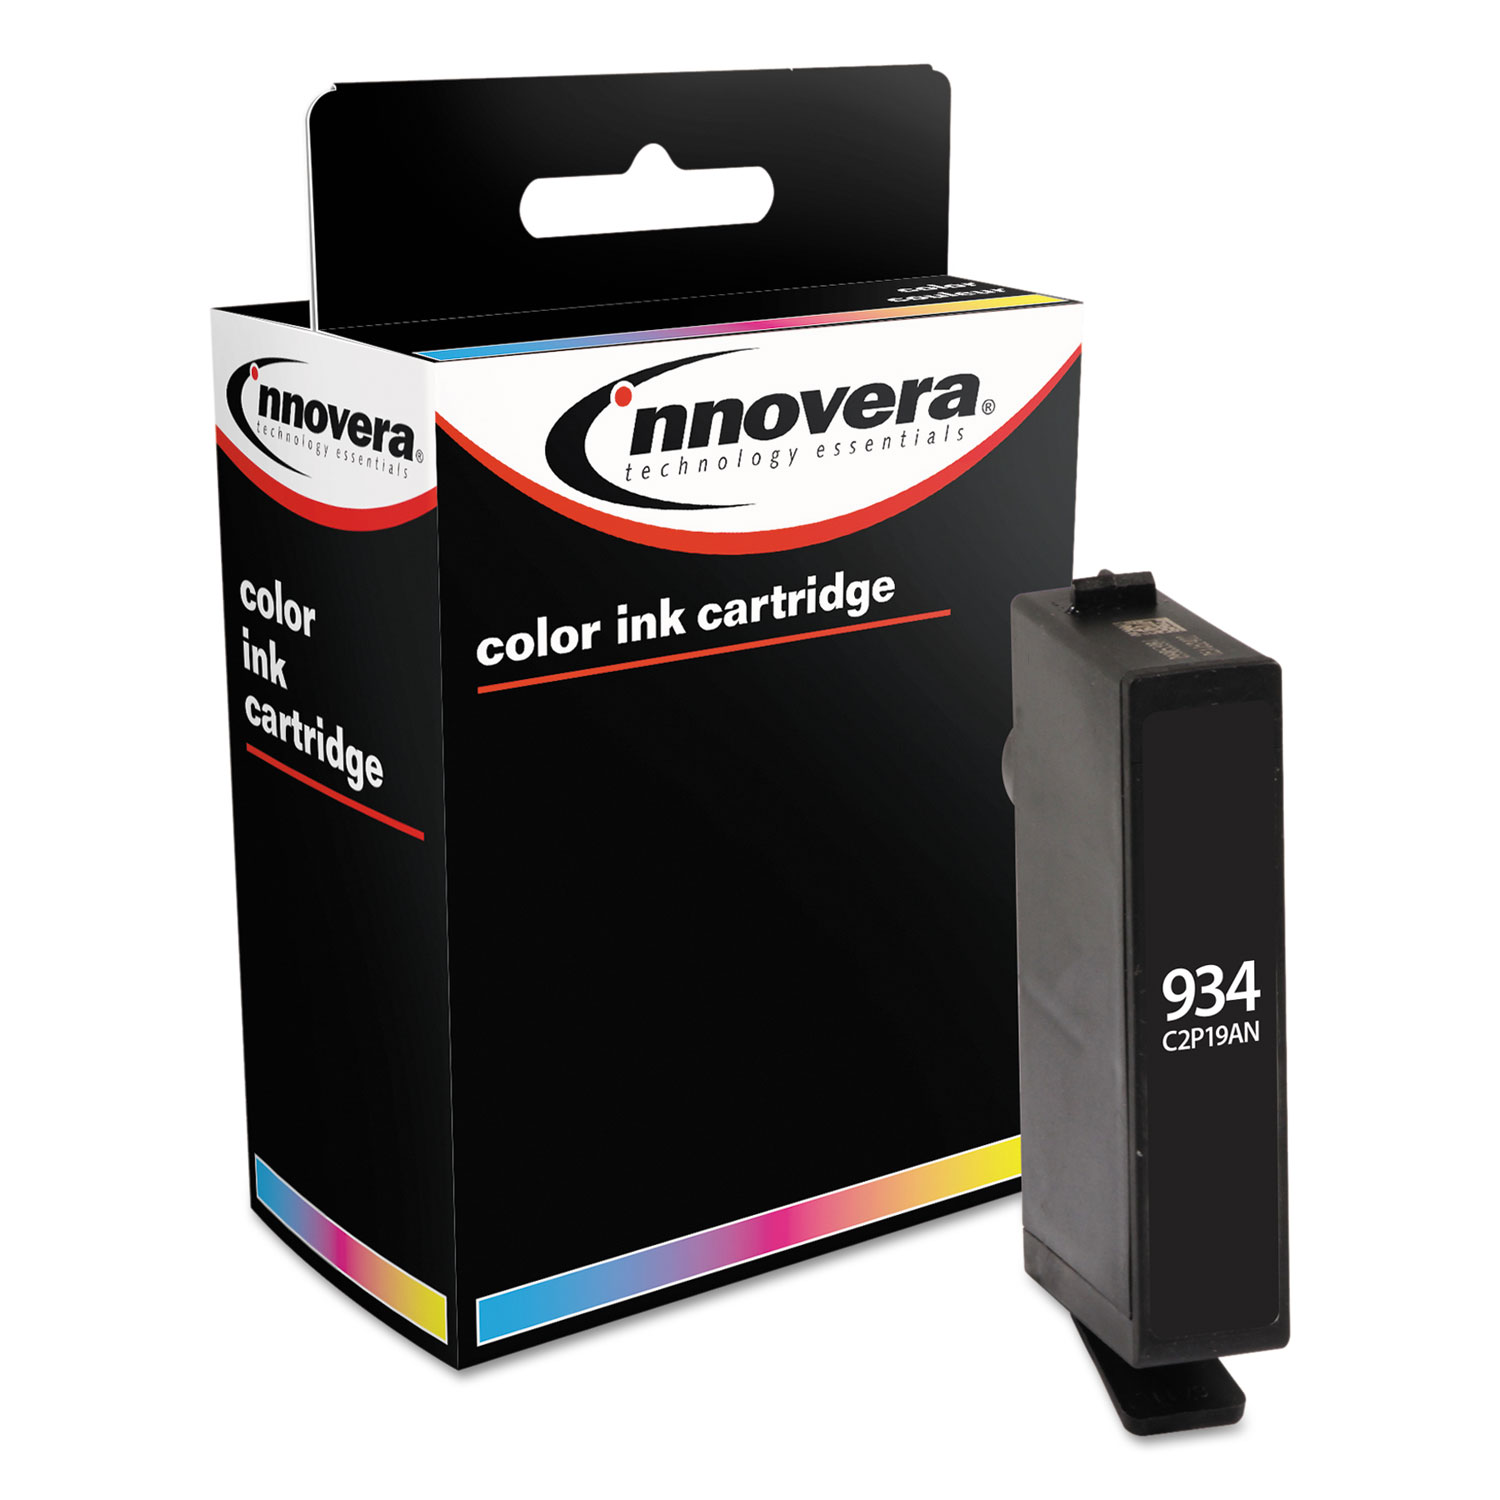  Innovera IVR934B Remanufactured C2P19AN (934) Ink, 400 Page-Yield, Black (IVR934B) 